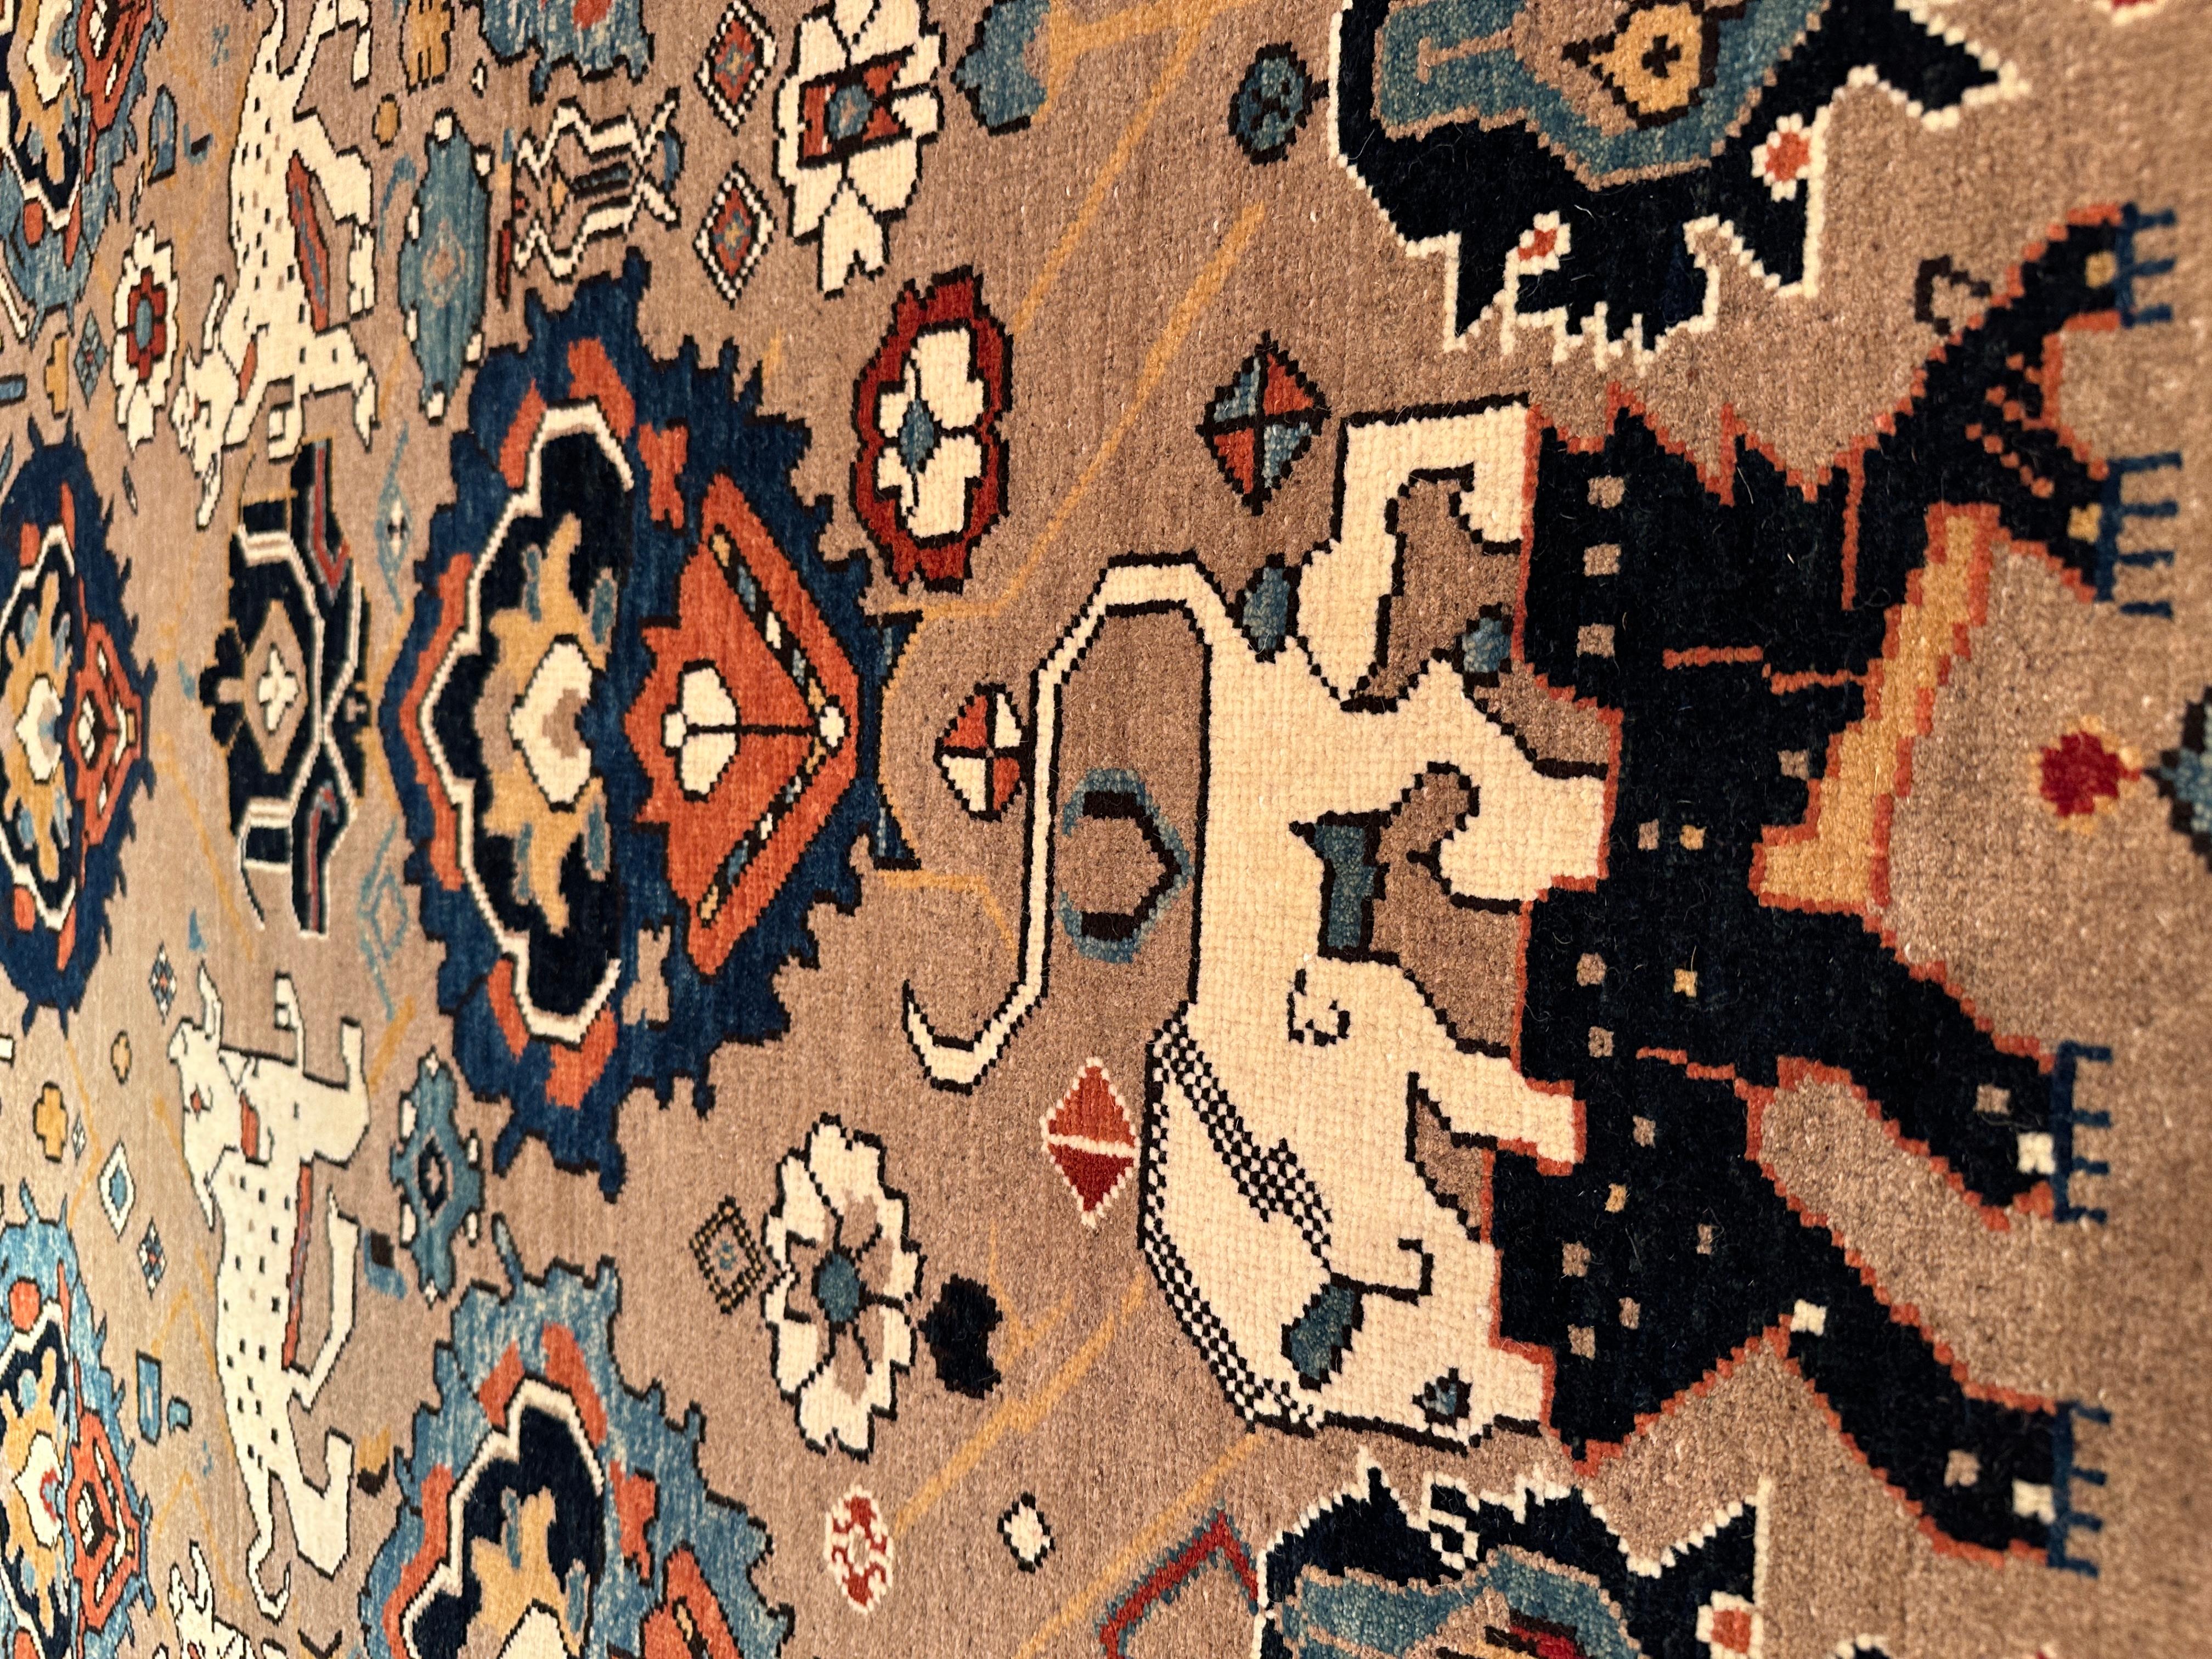 The source of the carpet comes from the book Orient Star – a carpet collection, E. Heinrich Kirchheim, Hali Publications Ltd, 1993 nr.81. This is an example of one of the most intriguing design groups of carpets from the Caucasus and North-west